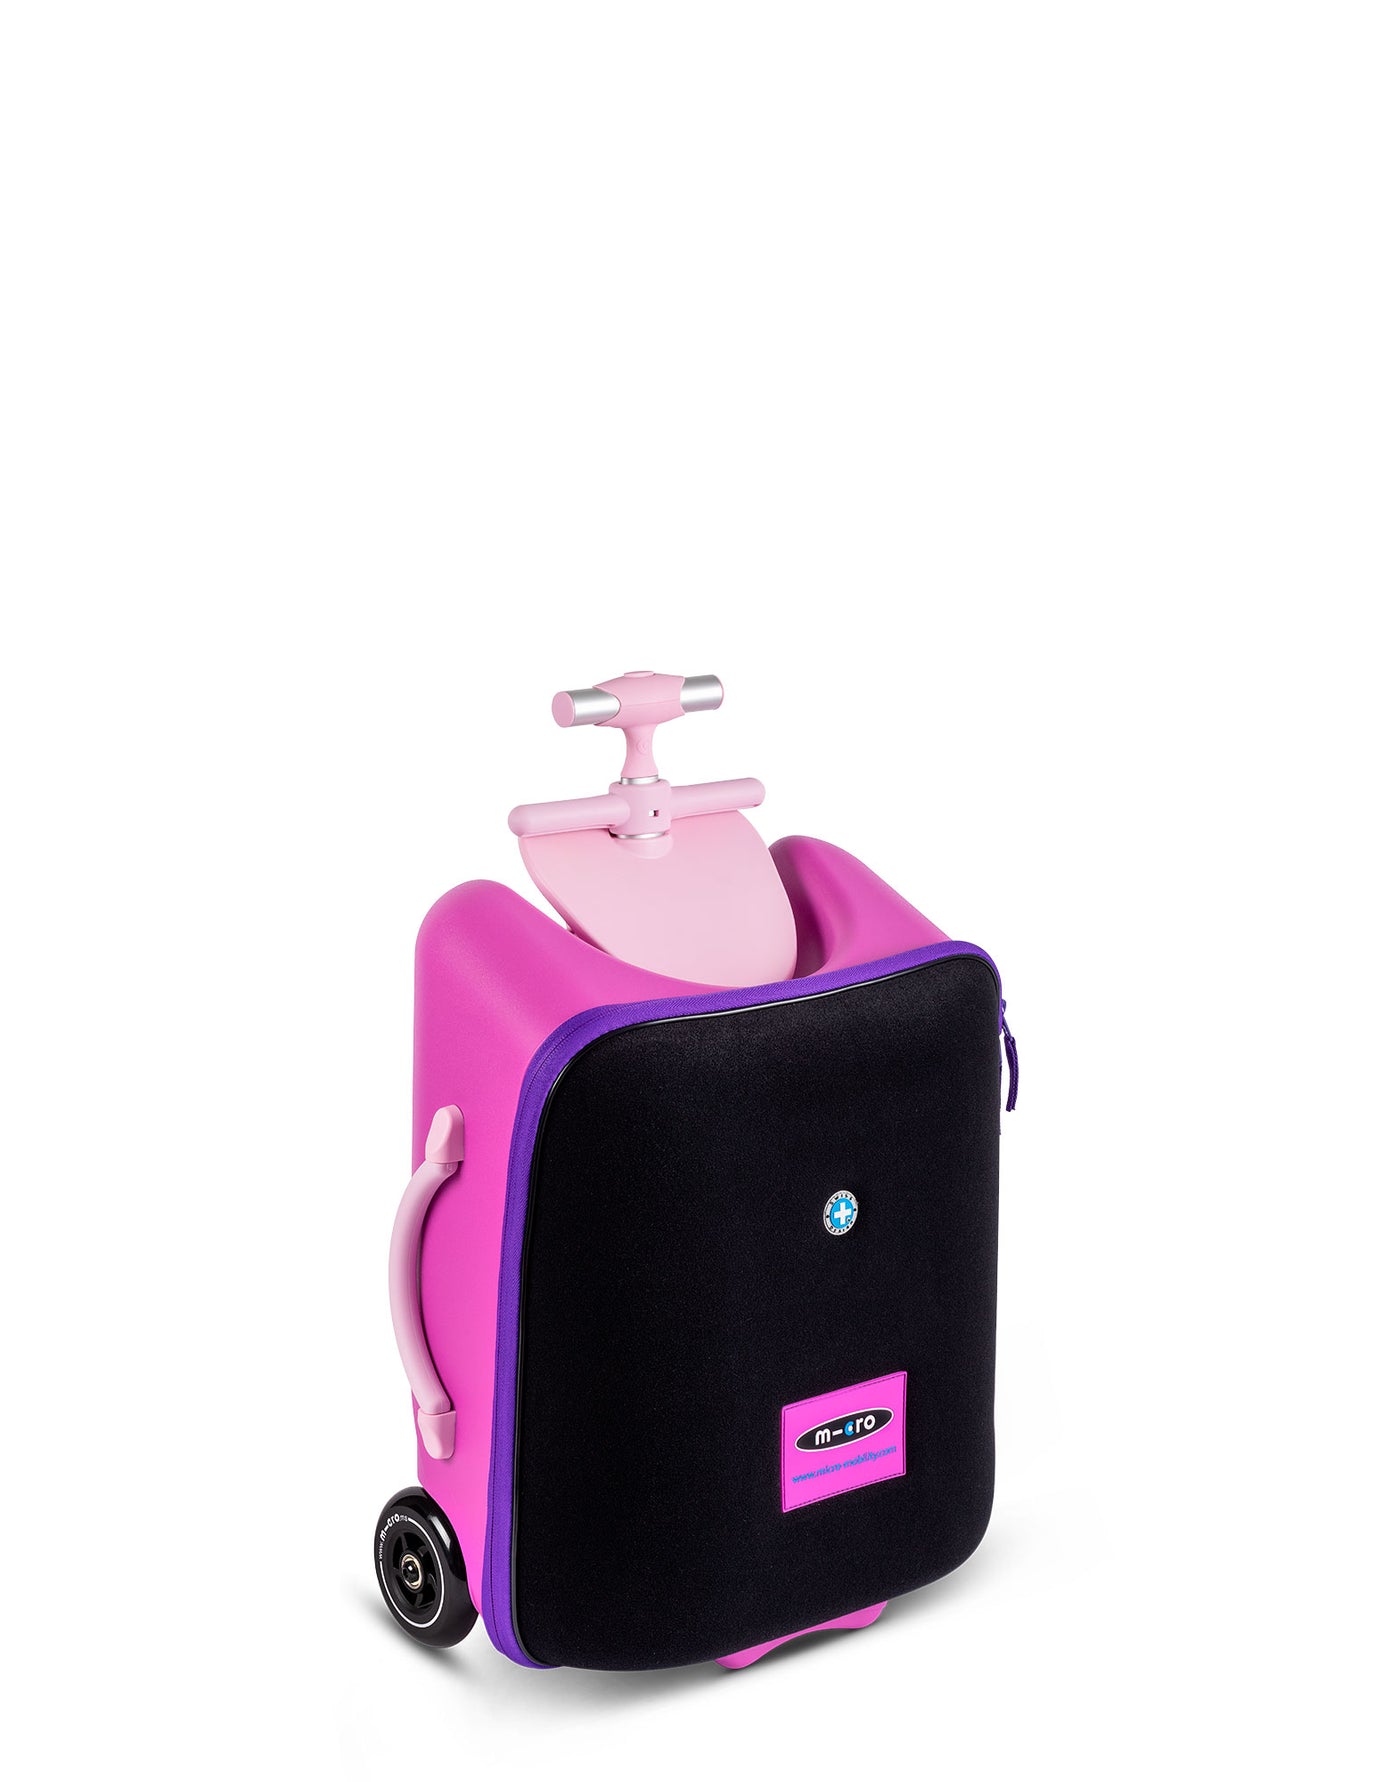 violet luggage eazy ride on suit case angle